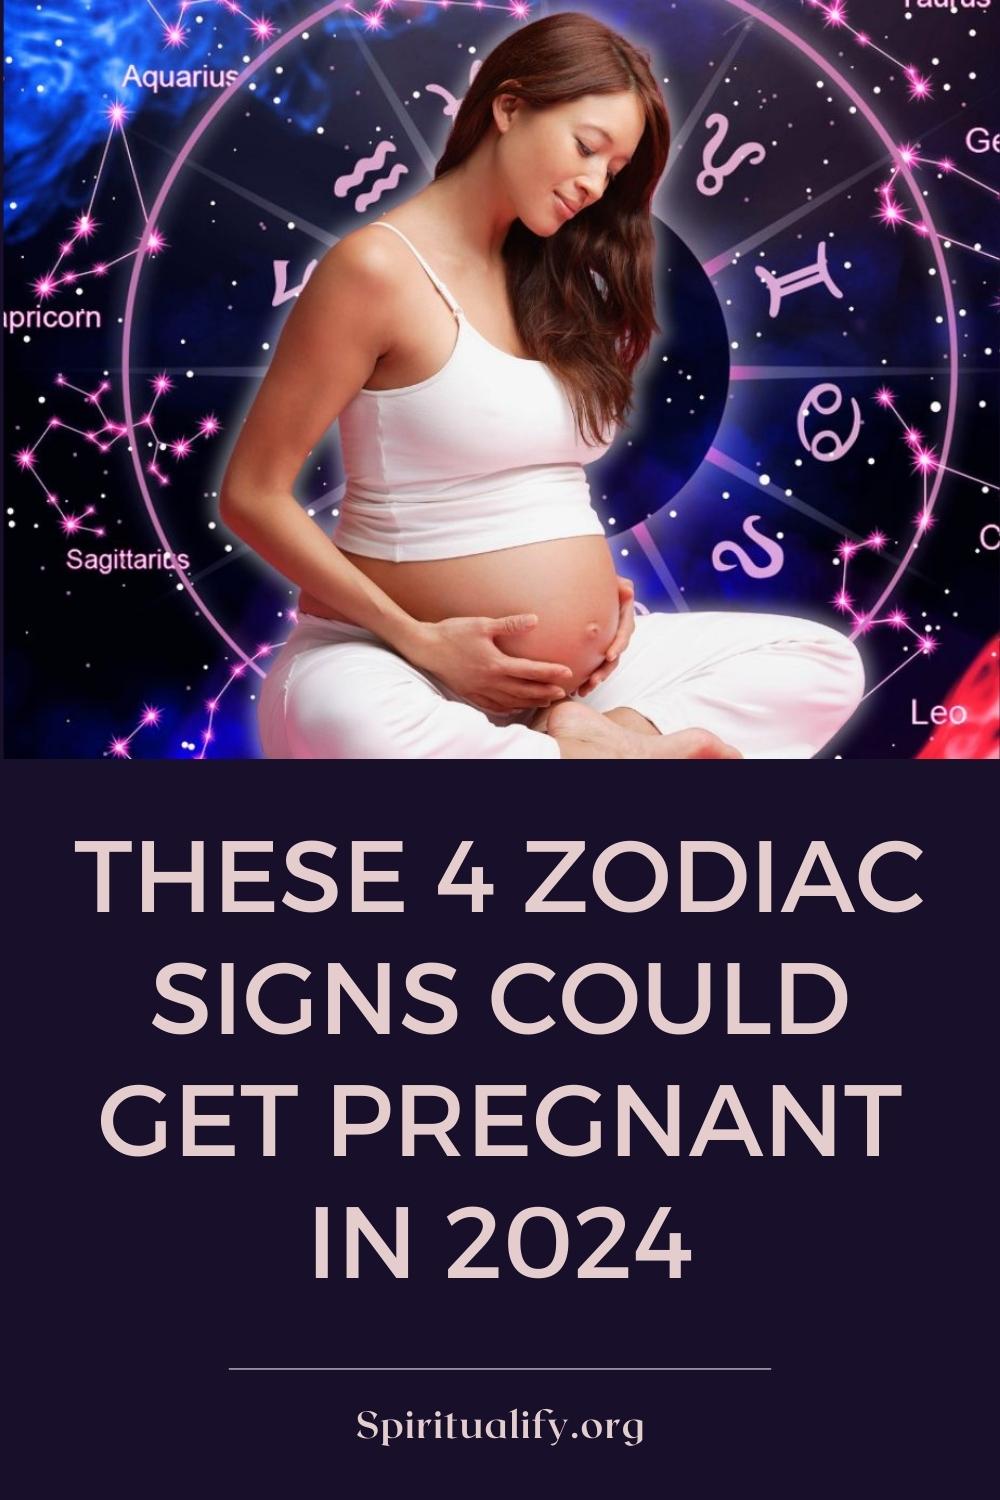 These 4 Zodiac Signs Could Get Pregnant In 2024